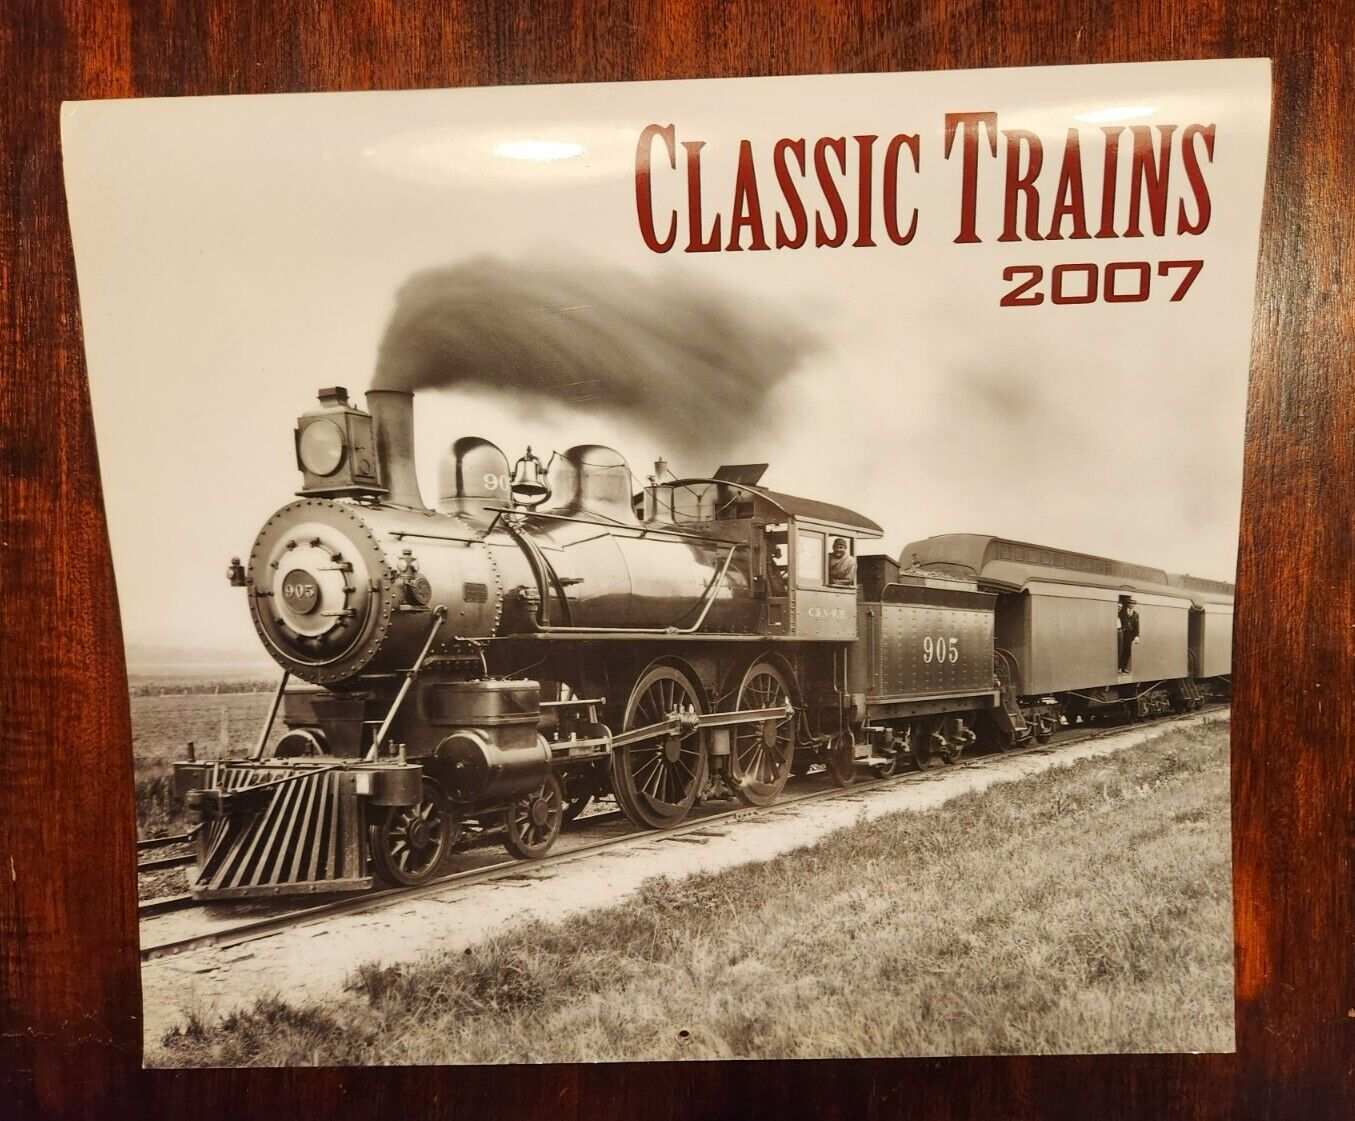 Classic Trains 2007 Calendar - published by Barnes & Noble - used